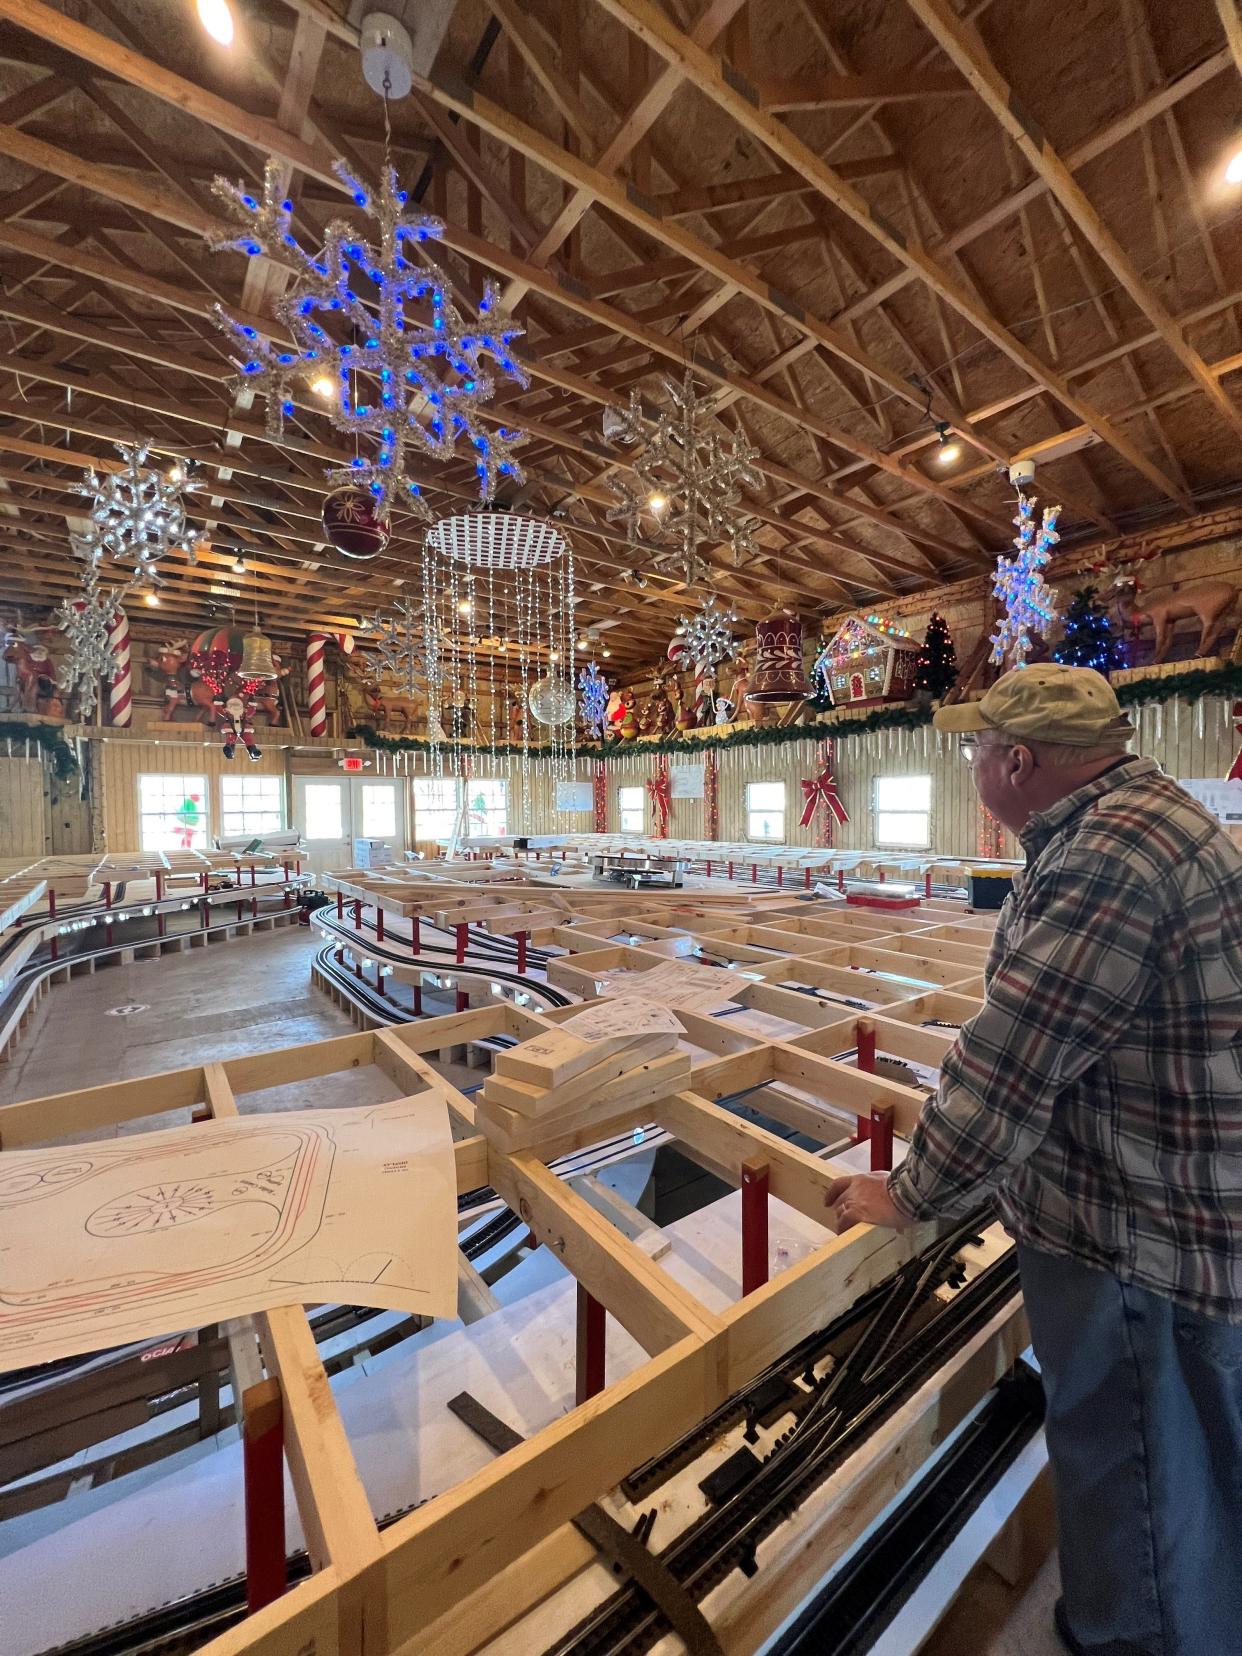 The Toy Train Room at the Christmas Ranch in Morrow.